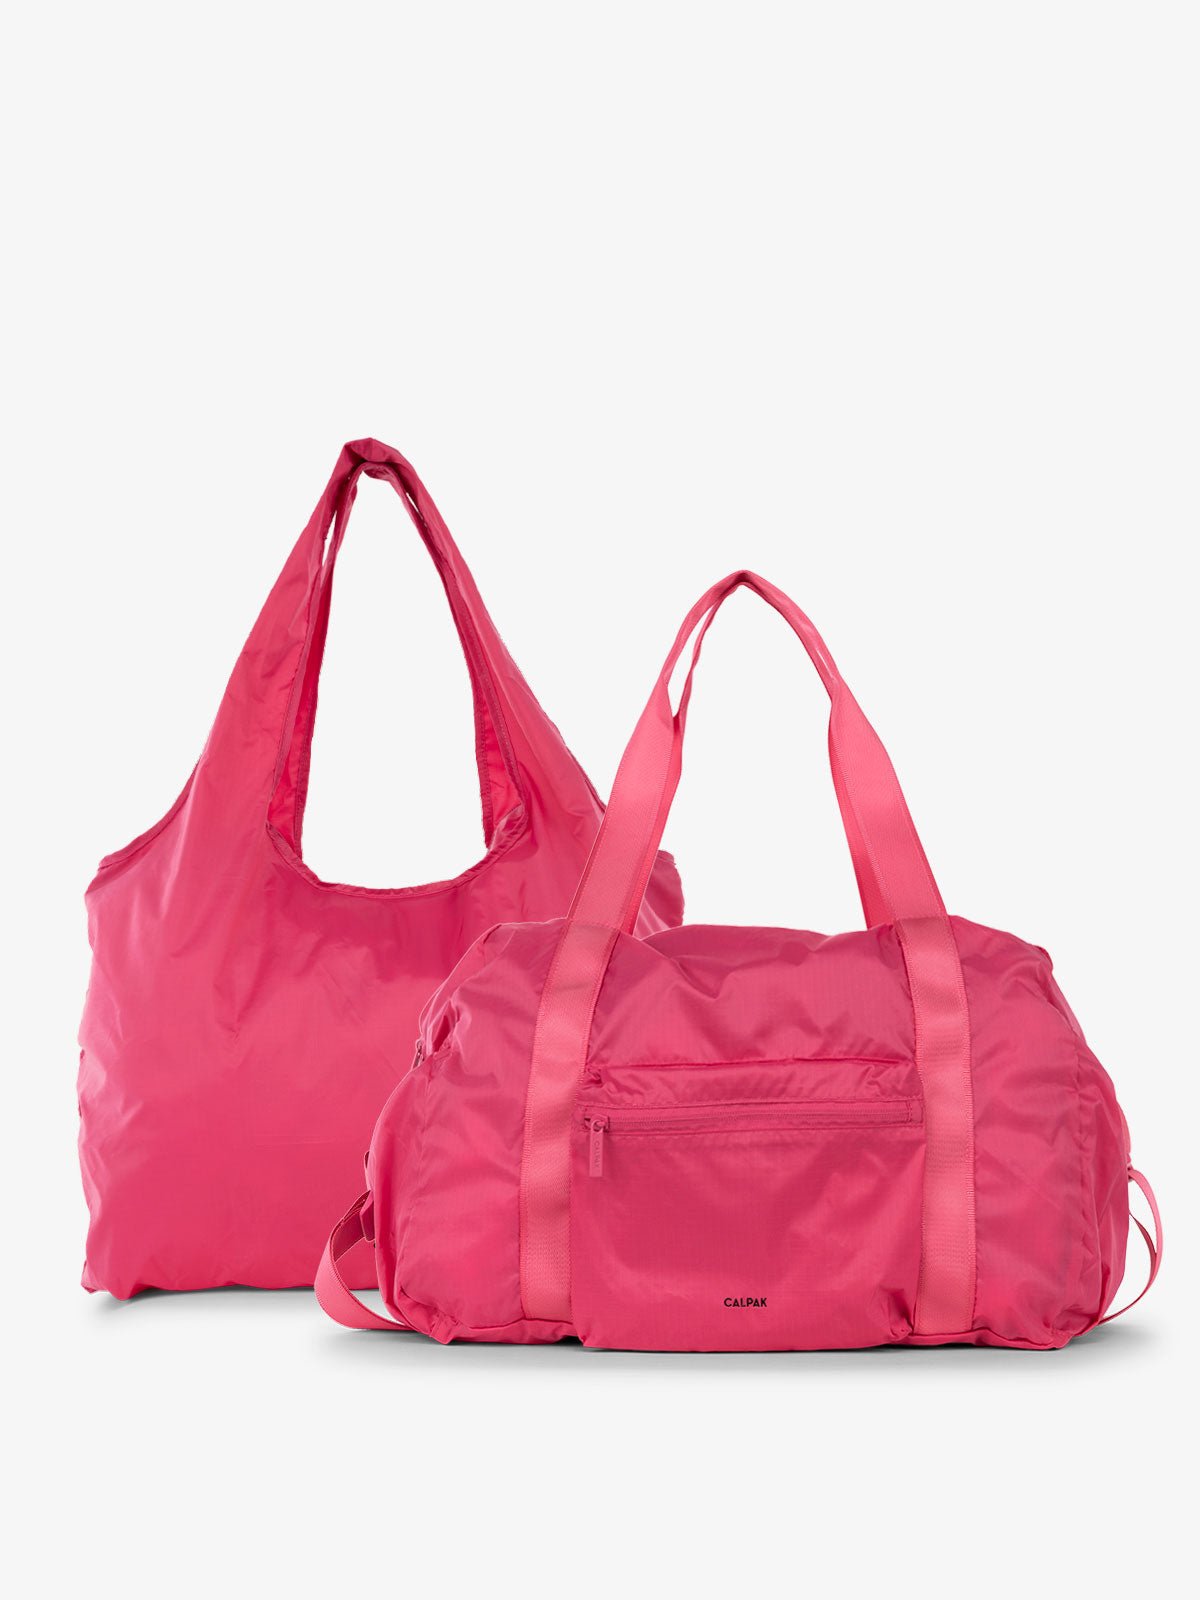 CALPAK Compakt Duo with tote bag and duffel bag in pink dragonfruit